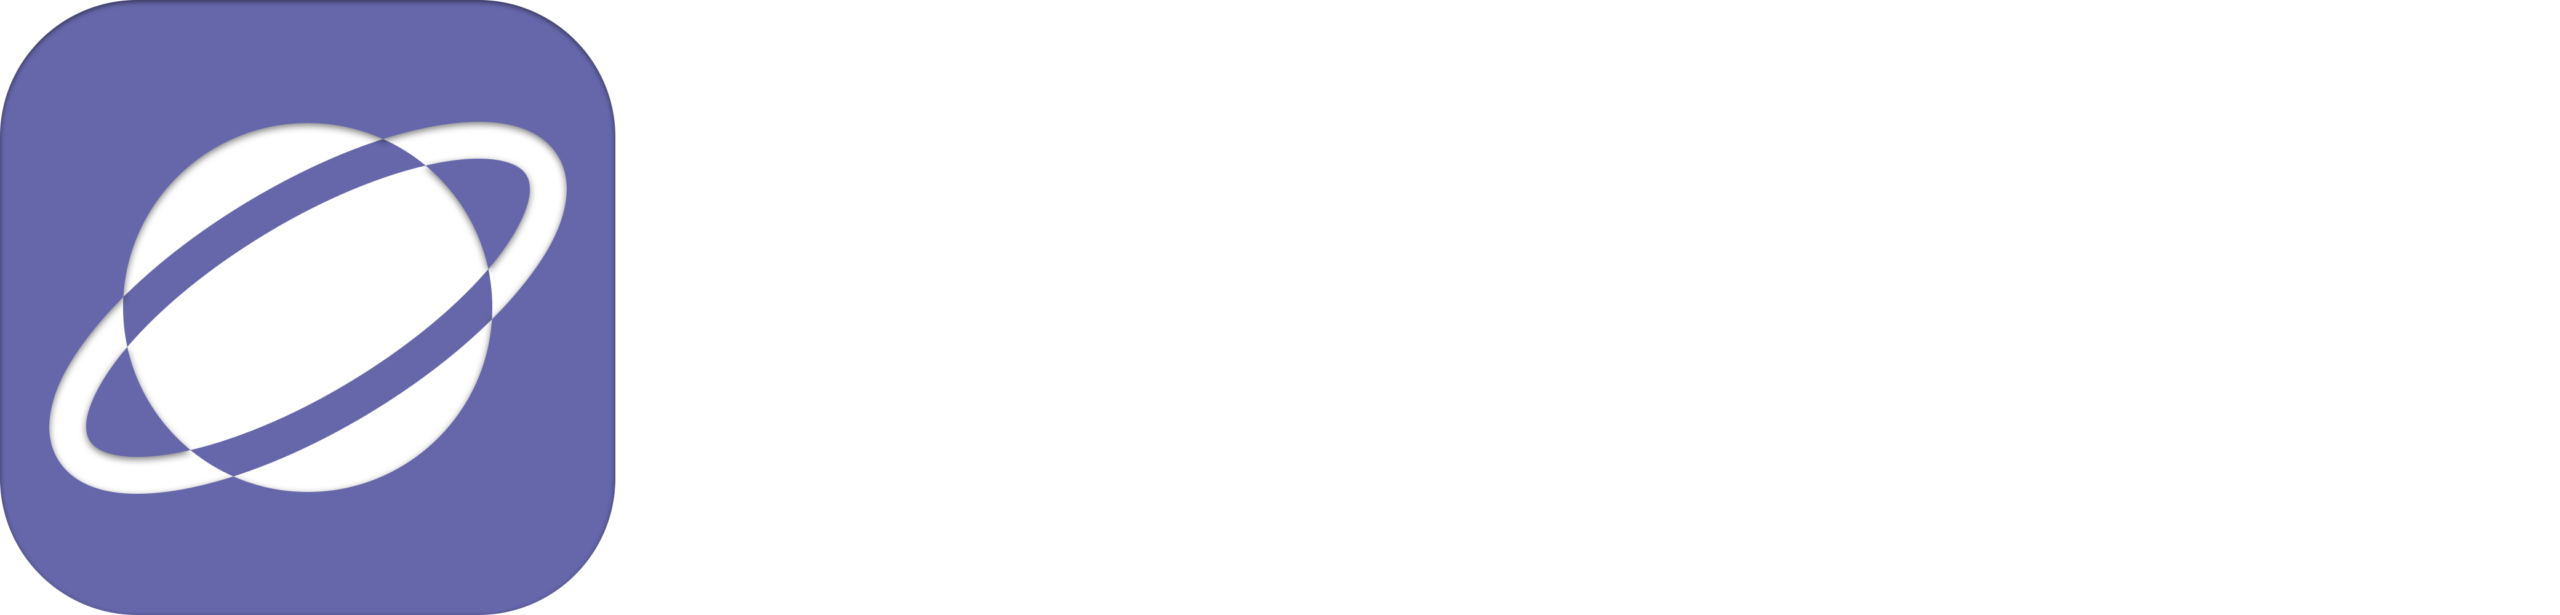 Galactic Archive